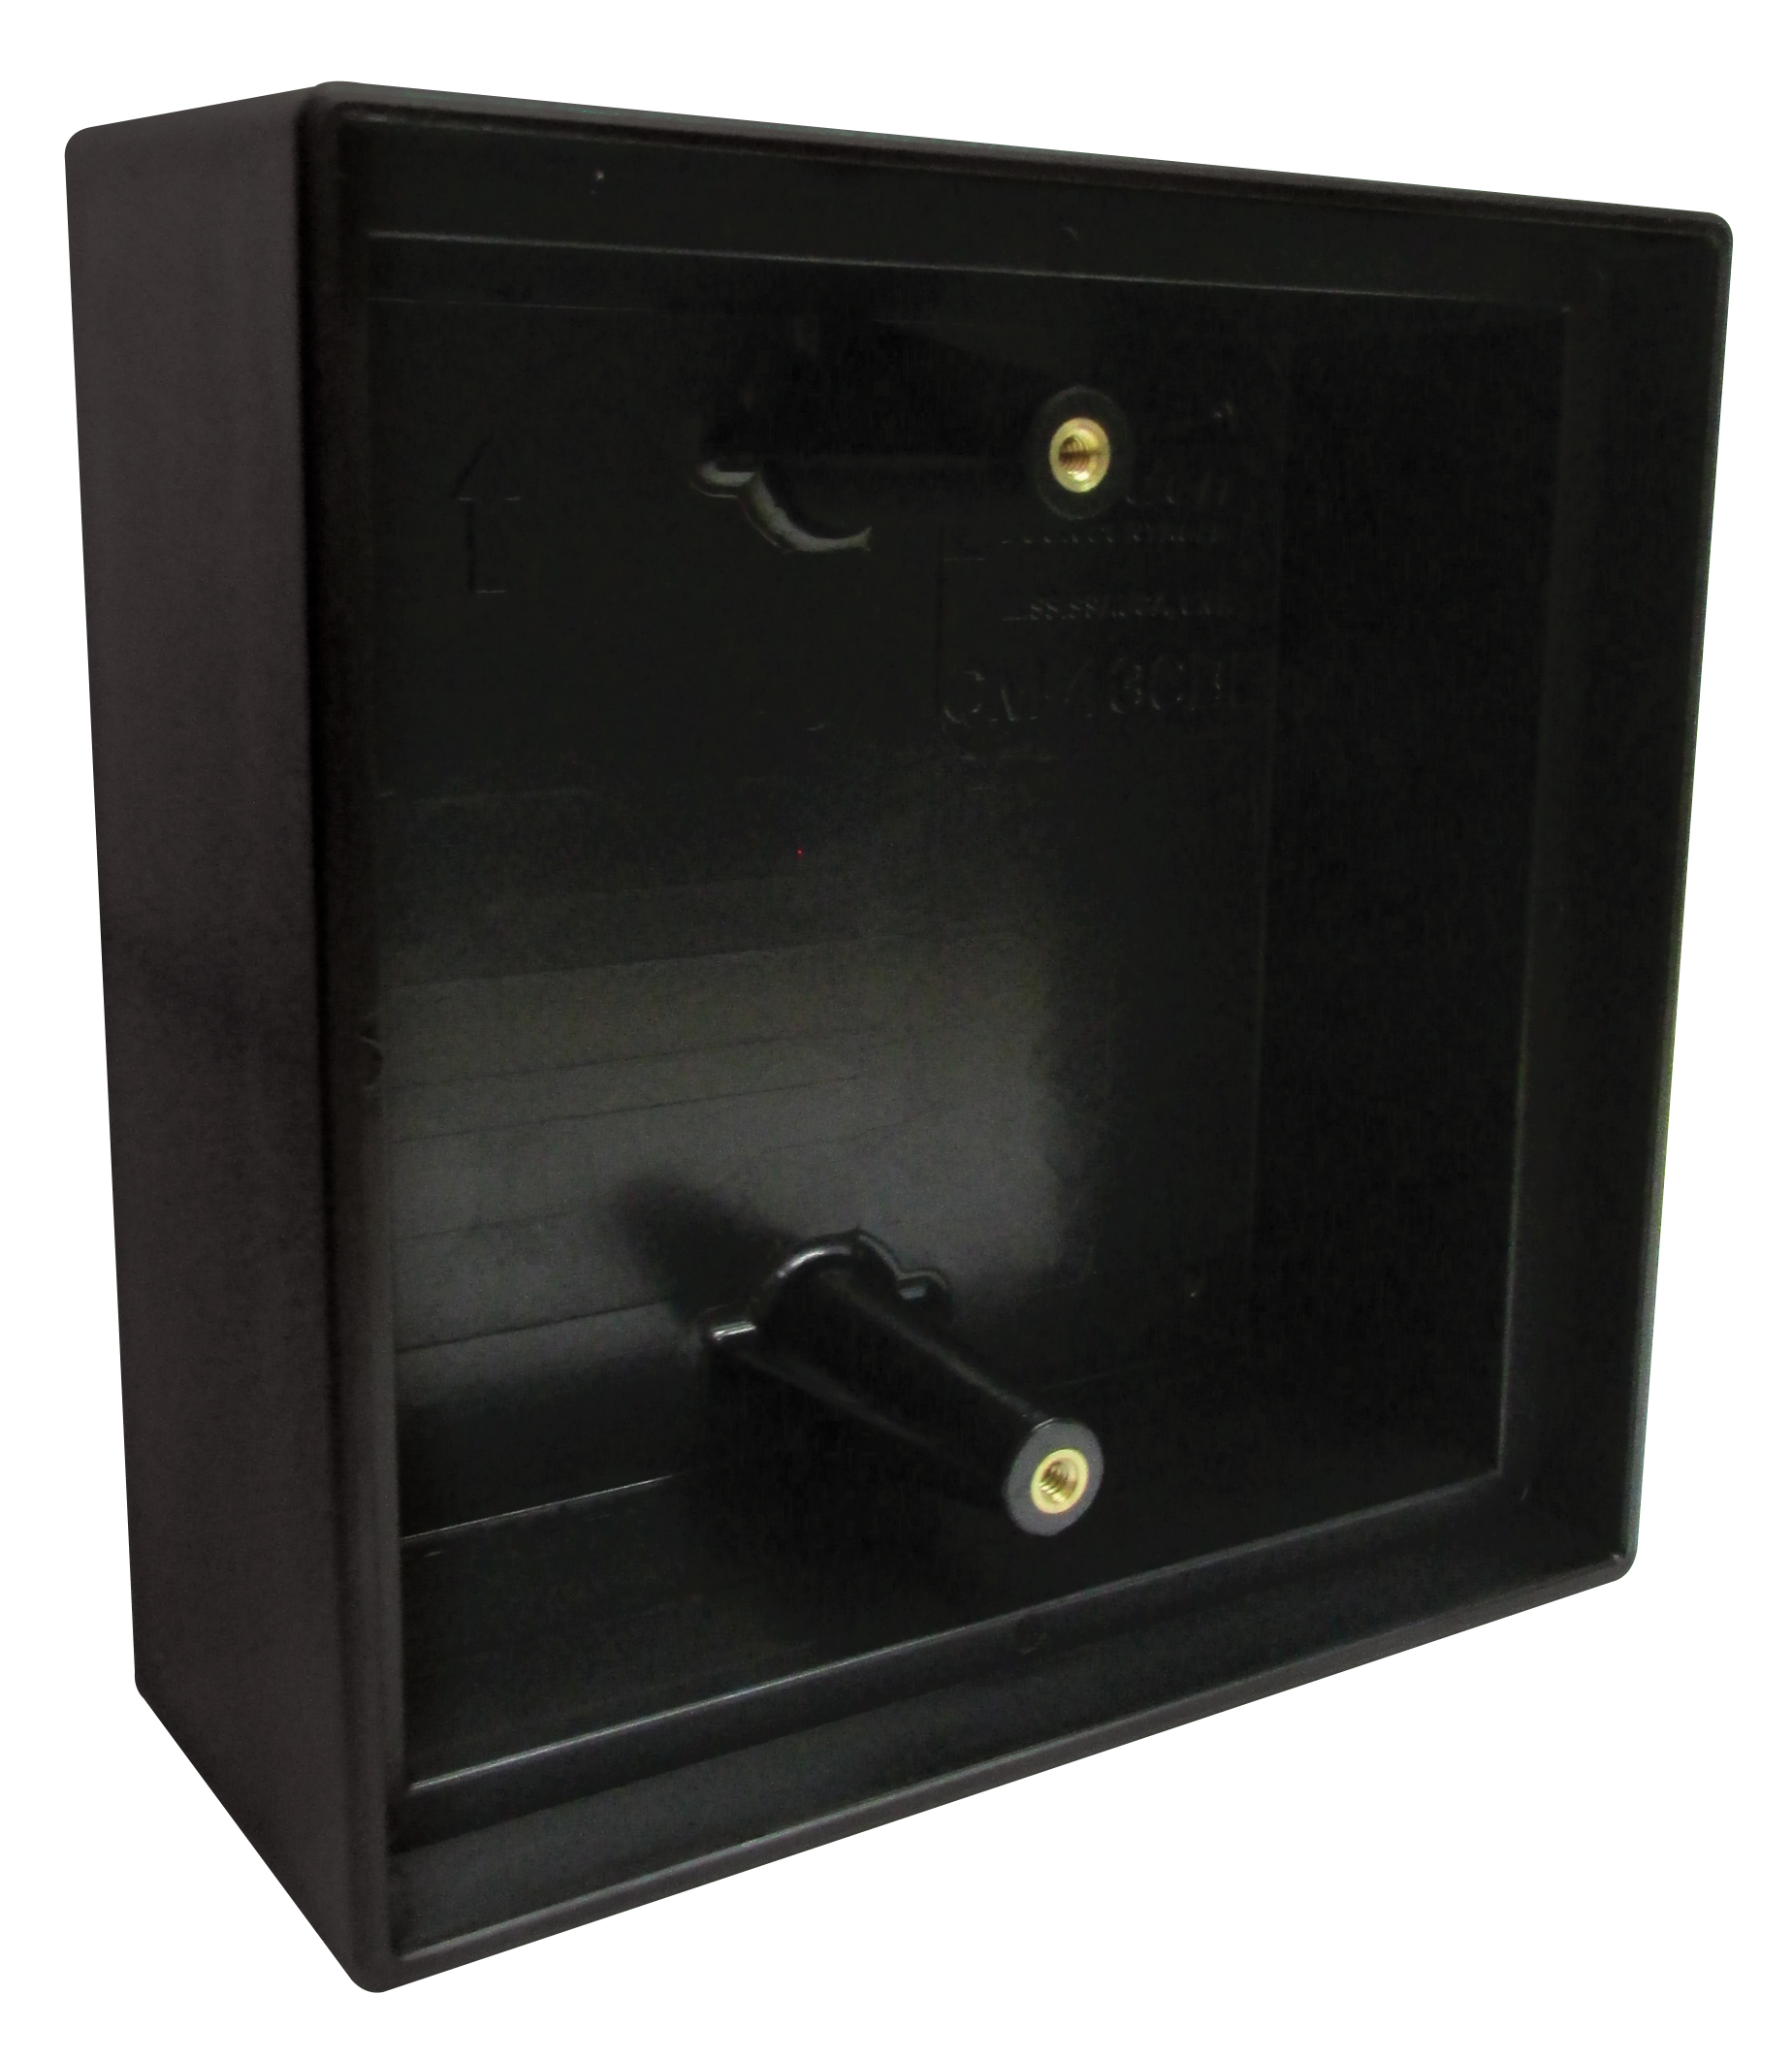 CM-450R/12: CX-WEC Series:Emergency Call For Universal Restrooms - Restroom Control